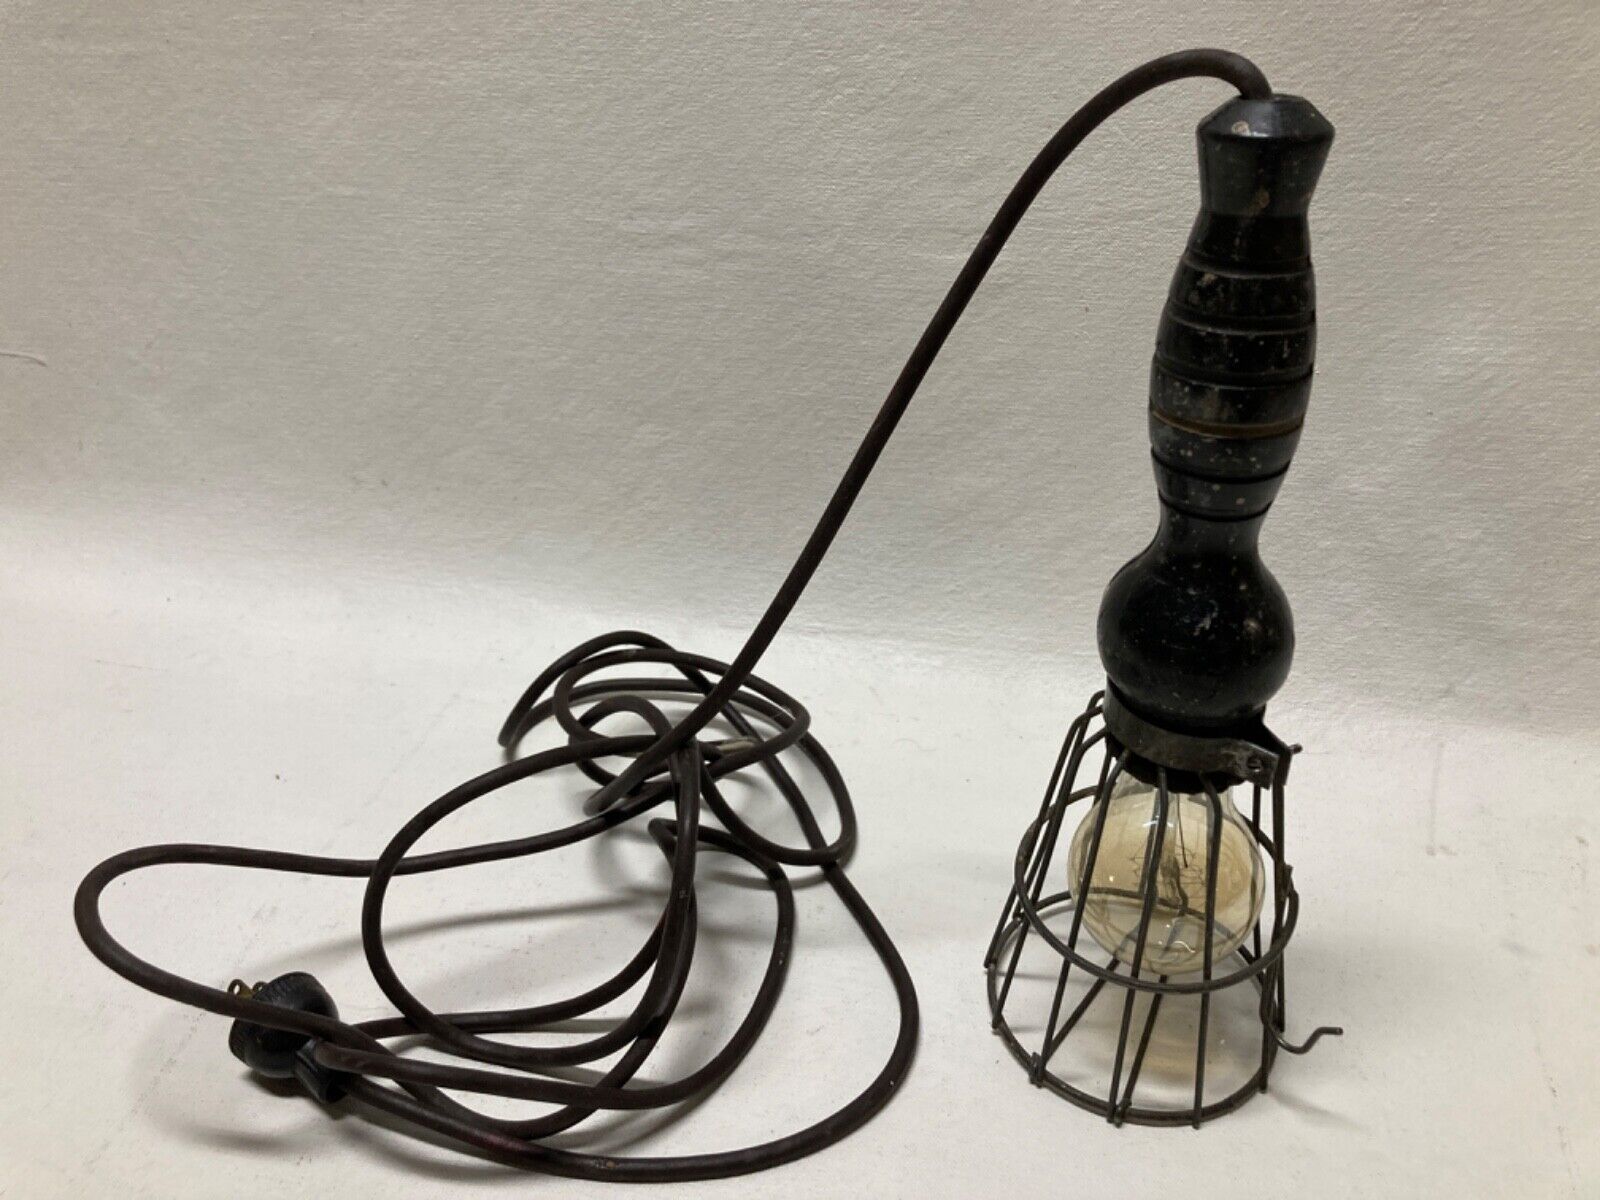 Antique 1920s Industrial Cage Hanging Light - Factory Style Lamp d